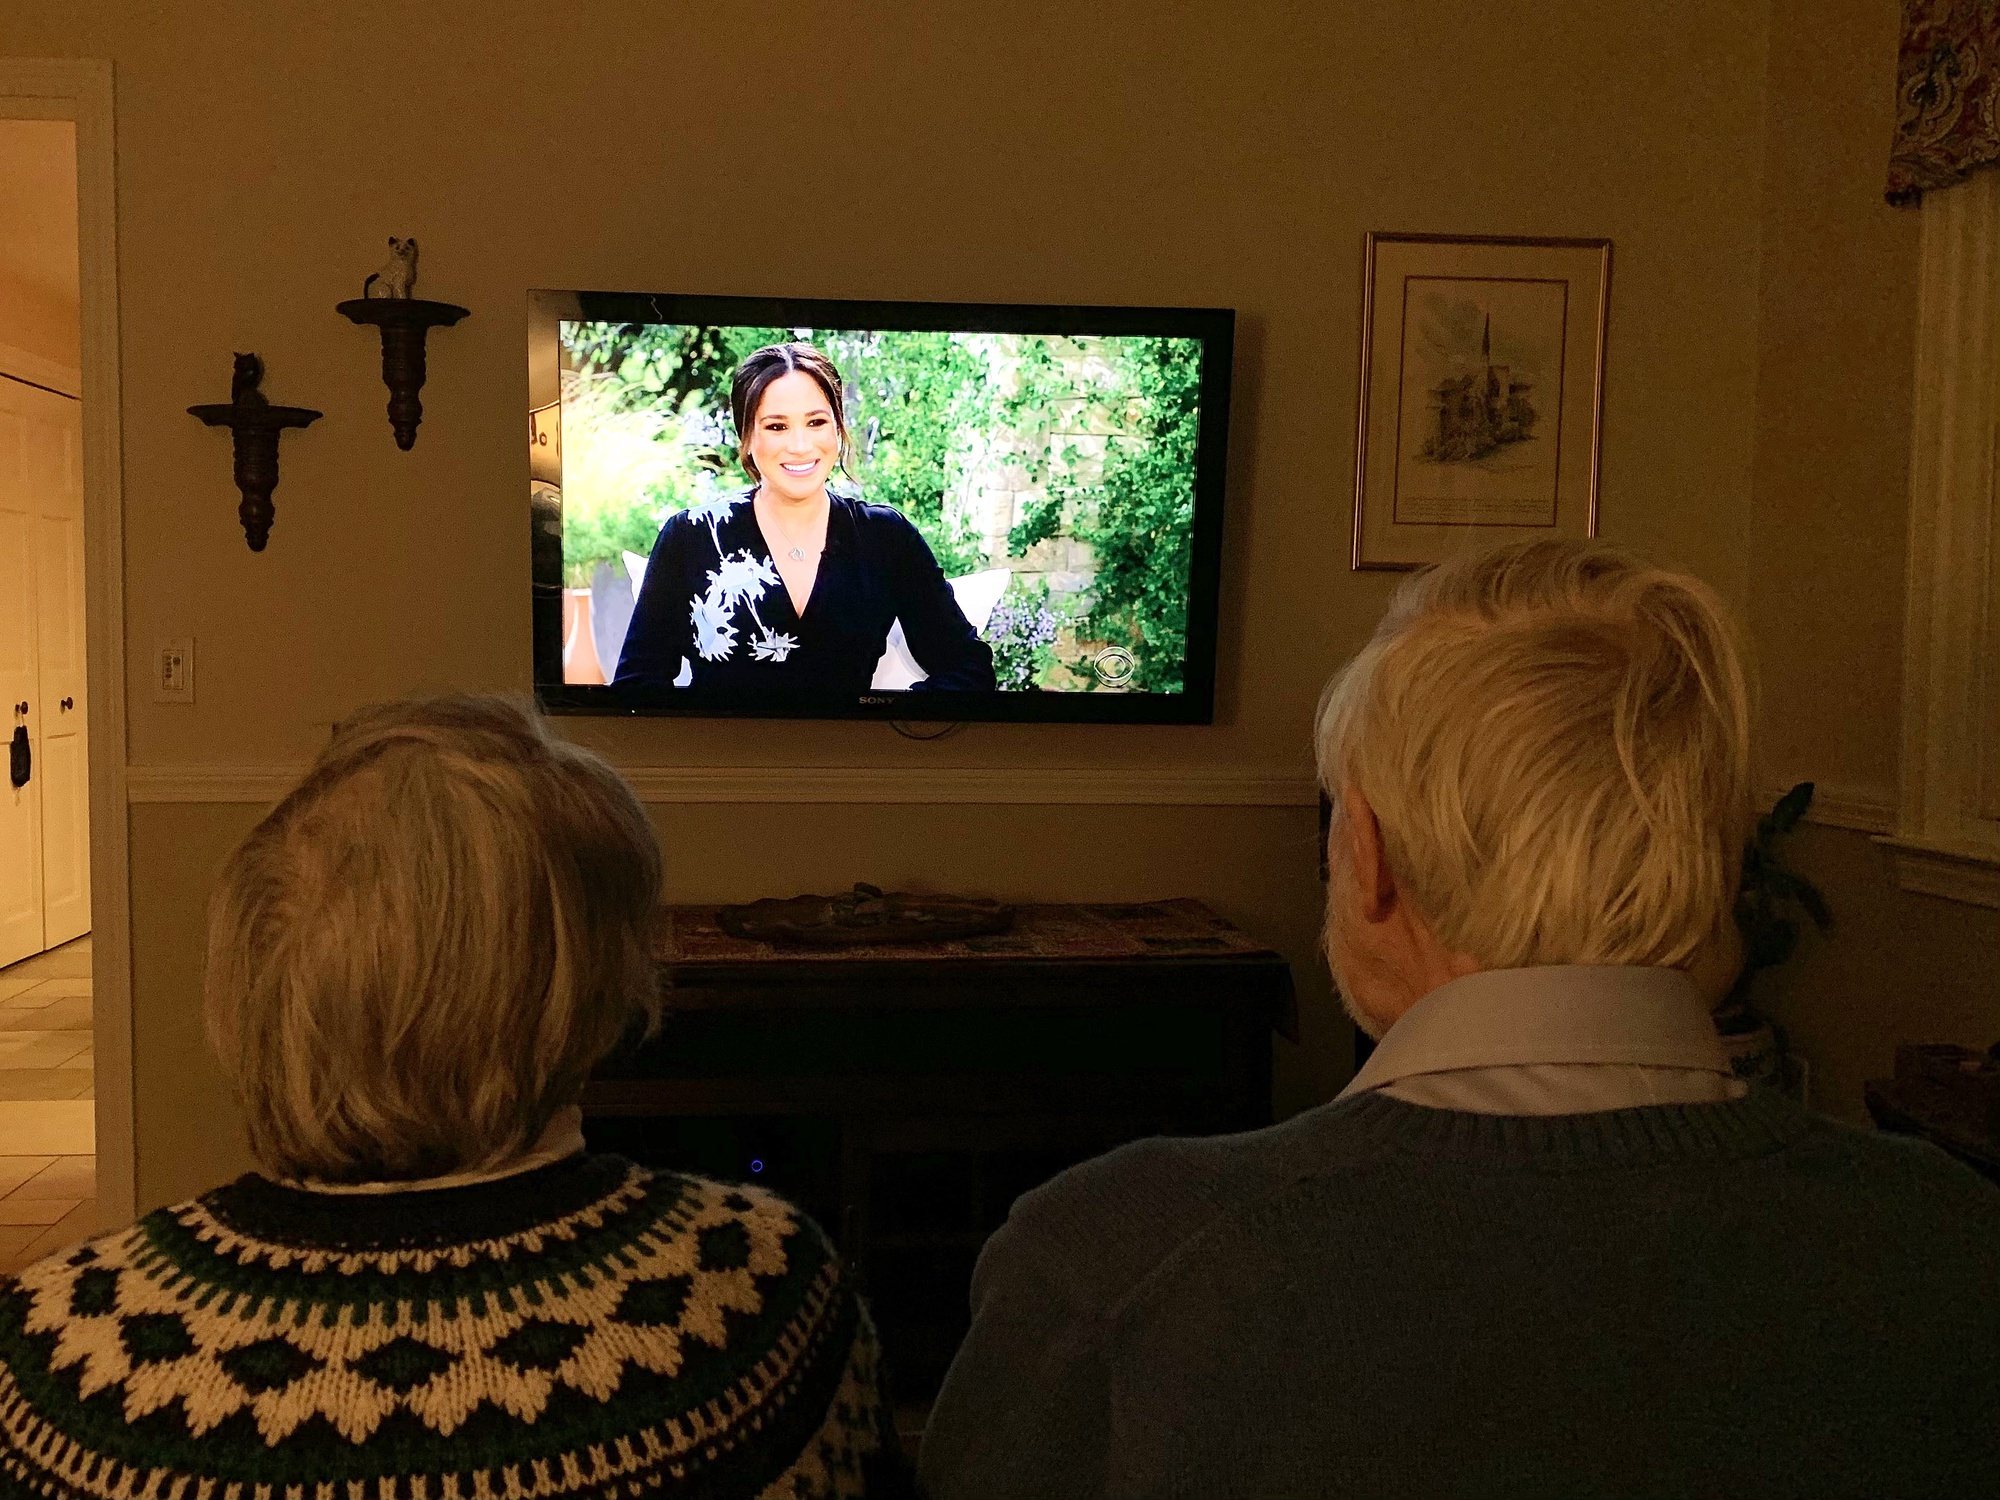 epa09060476 Ruth (L) and Ken (R) Campbell watch a televised interview by US television personality Oprah Winfrey of Britain&#039;s Harry and Meghan, Duke and Duchess of Sussex on the US netwrok CBS in West Roxbury, Massachusetts, USA, 07 March 2021.  EPA/KATE CAMPBELL